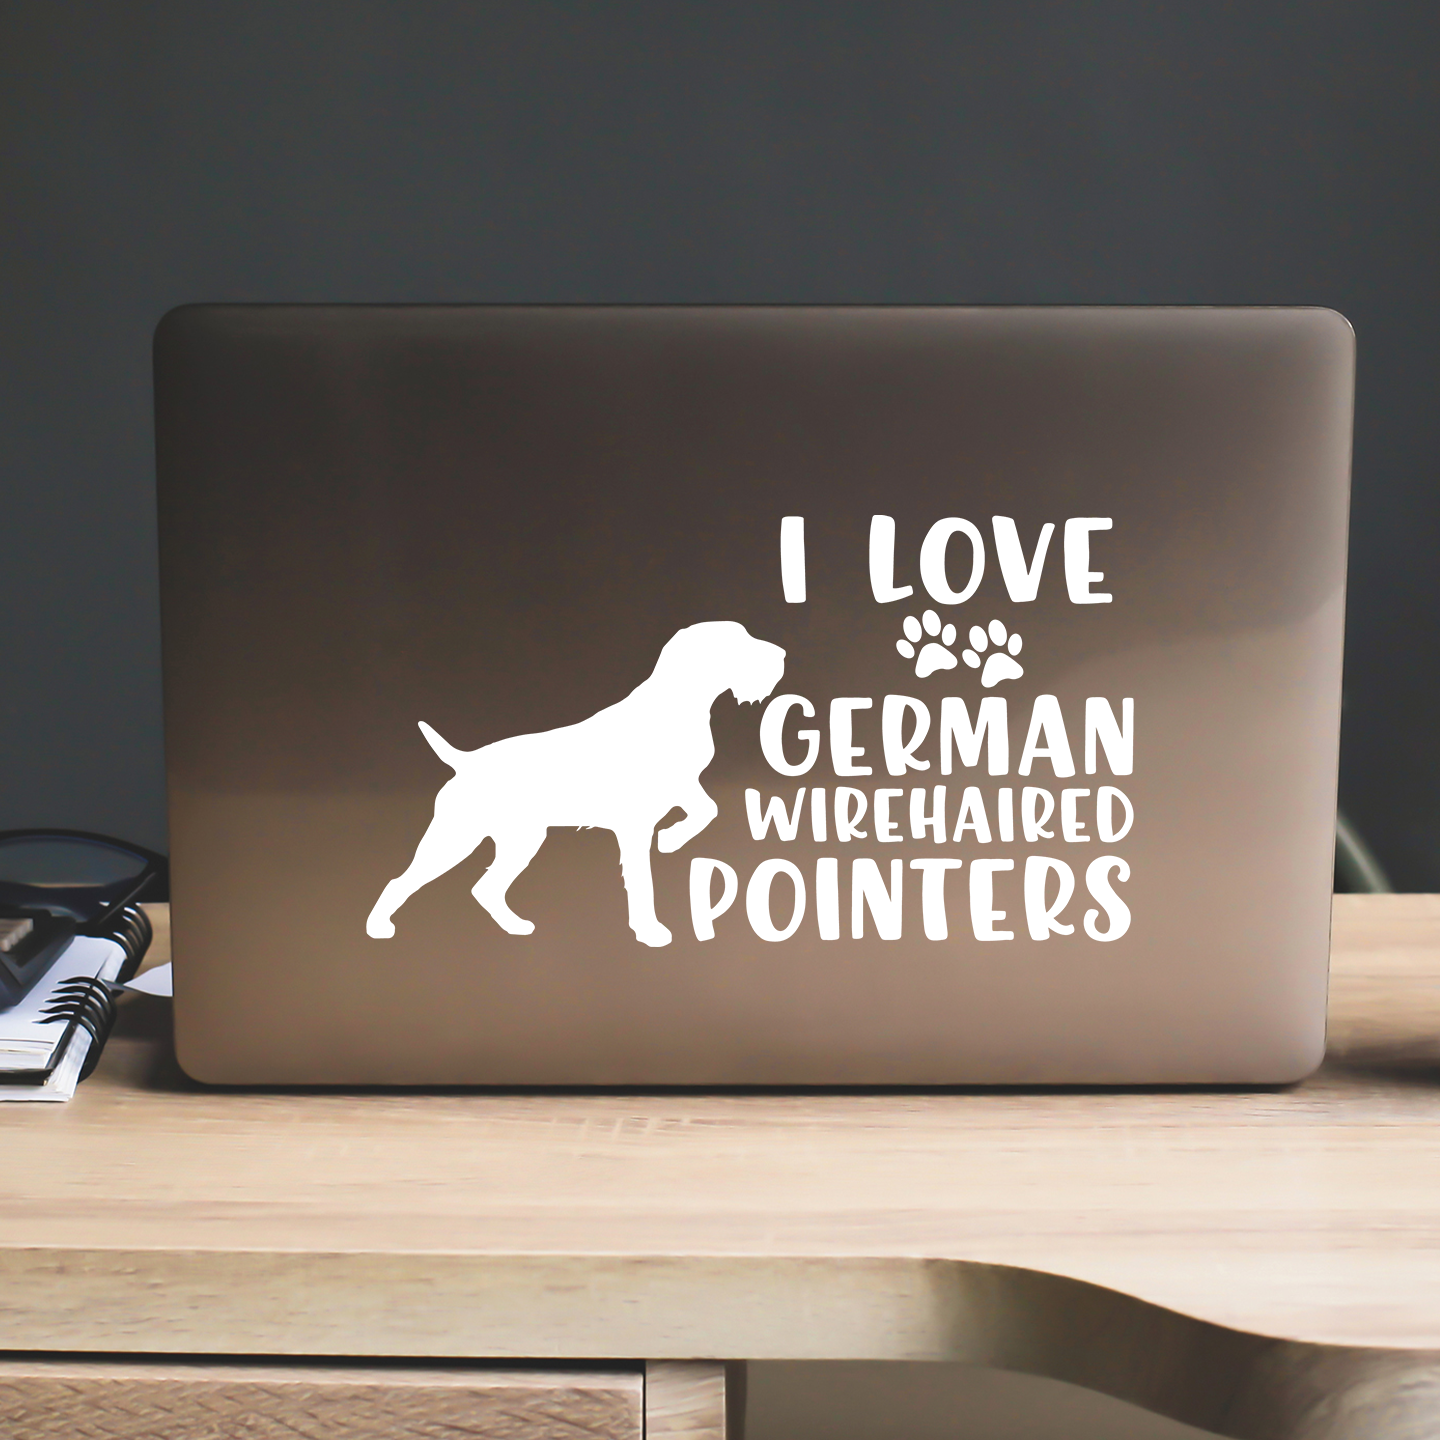 I Love German Wirehaired Pointers Sticker